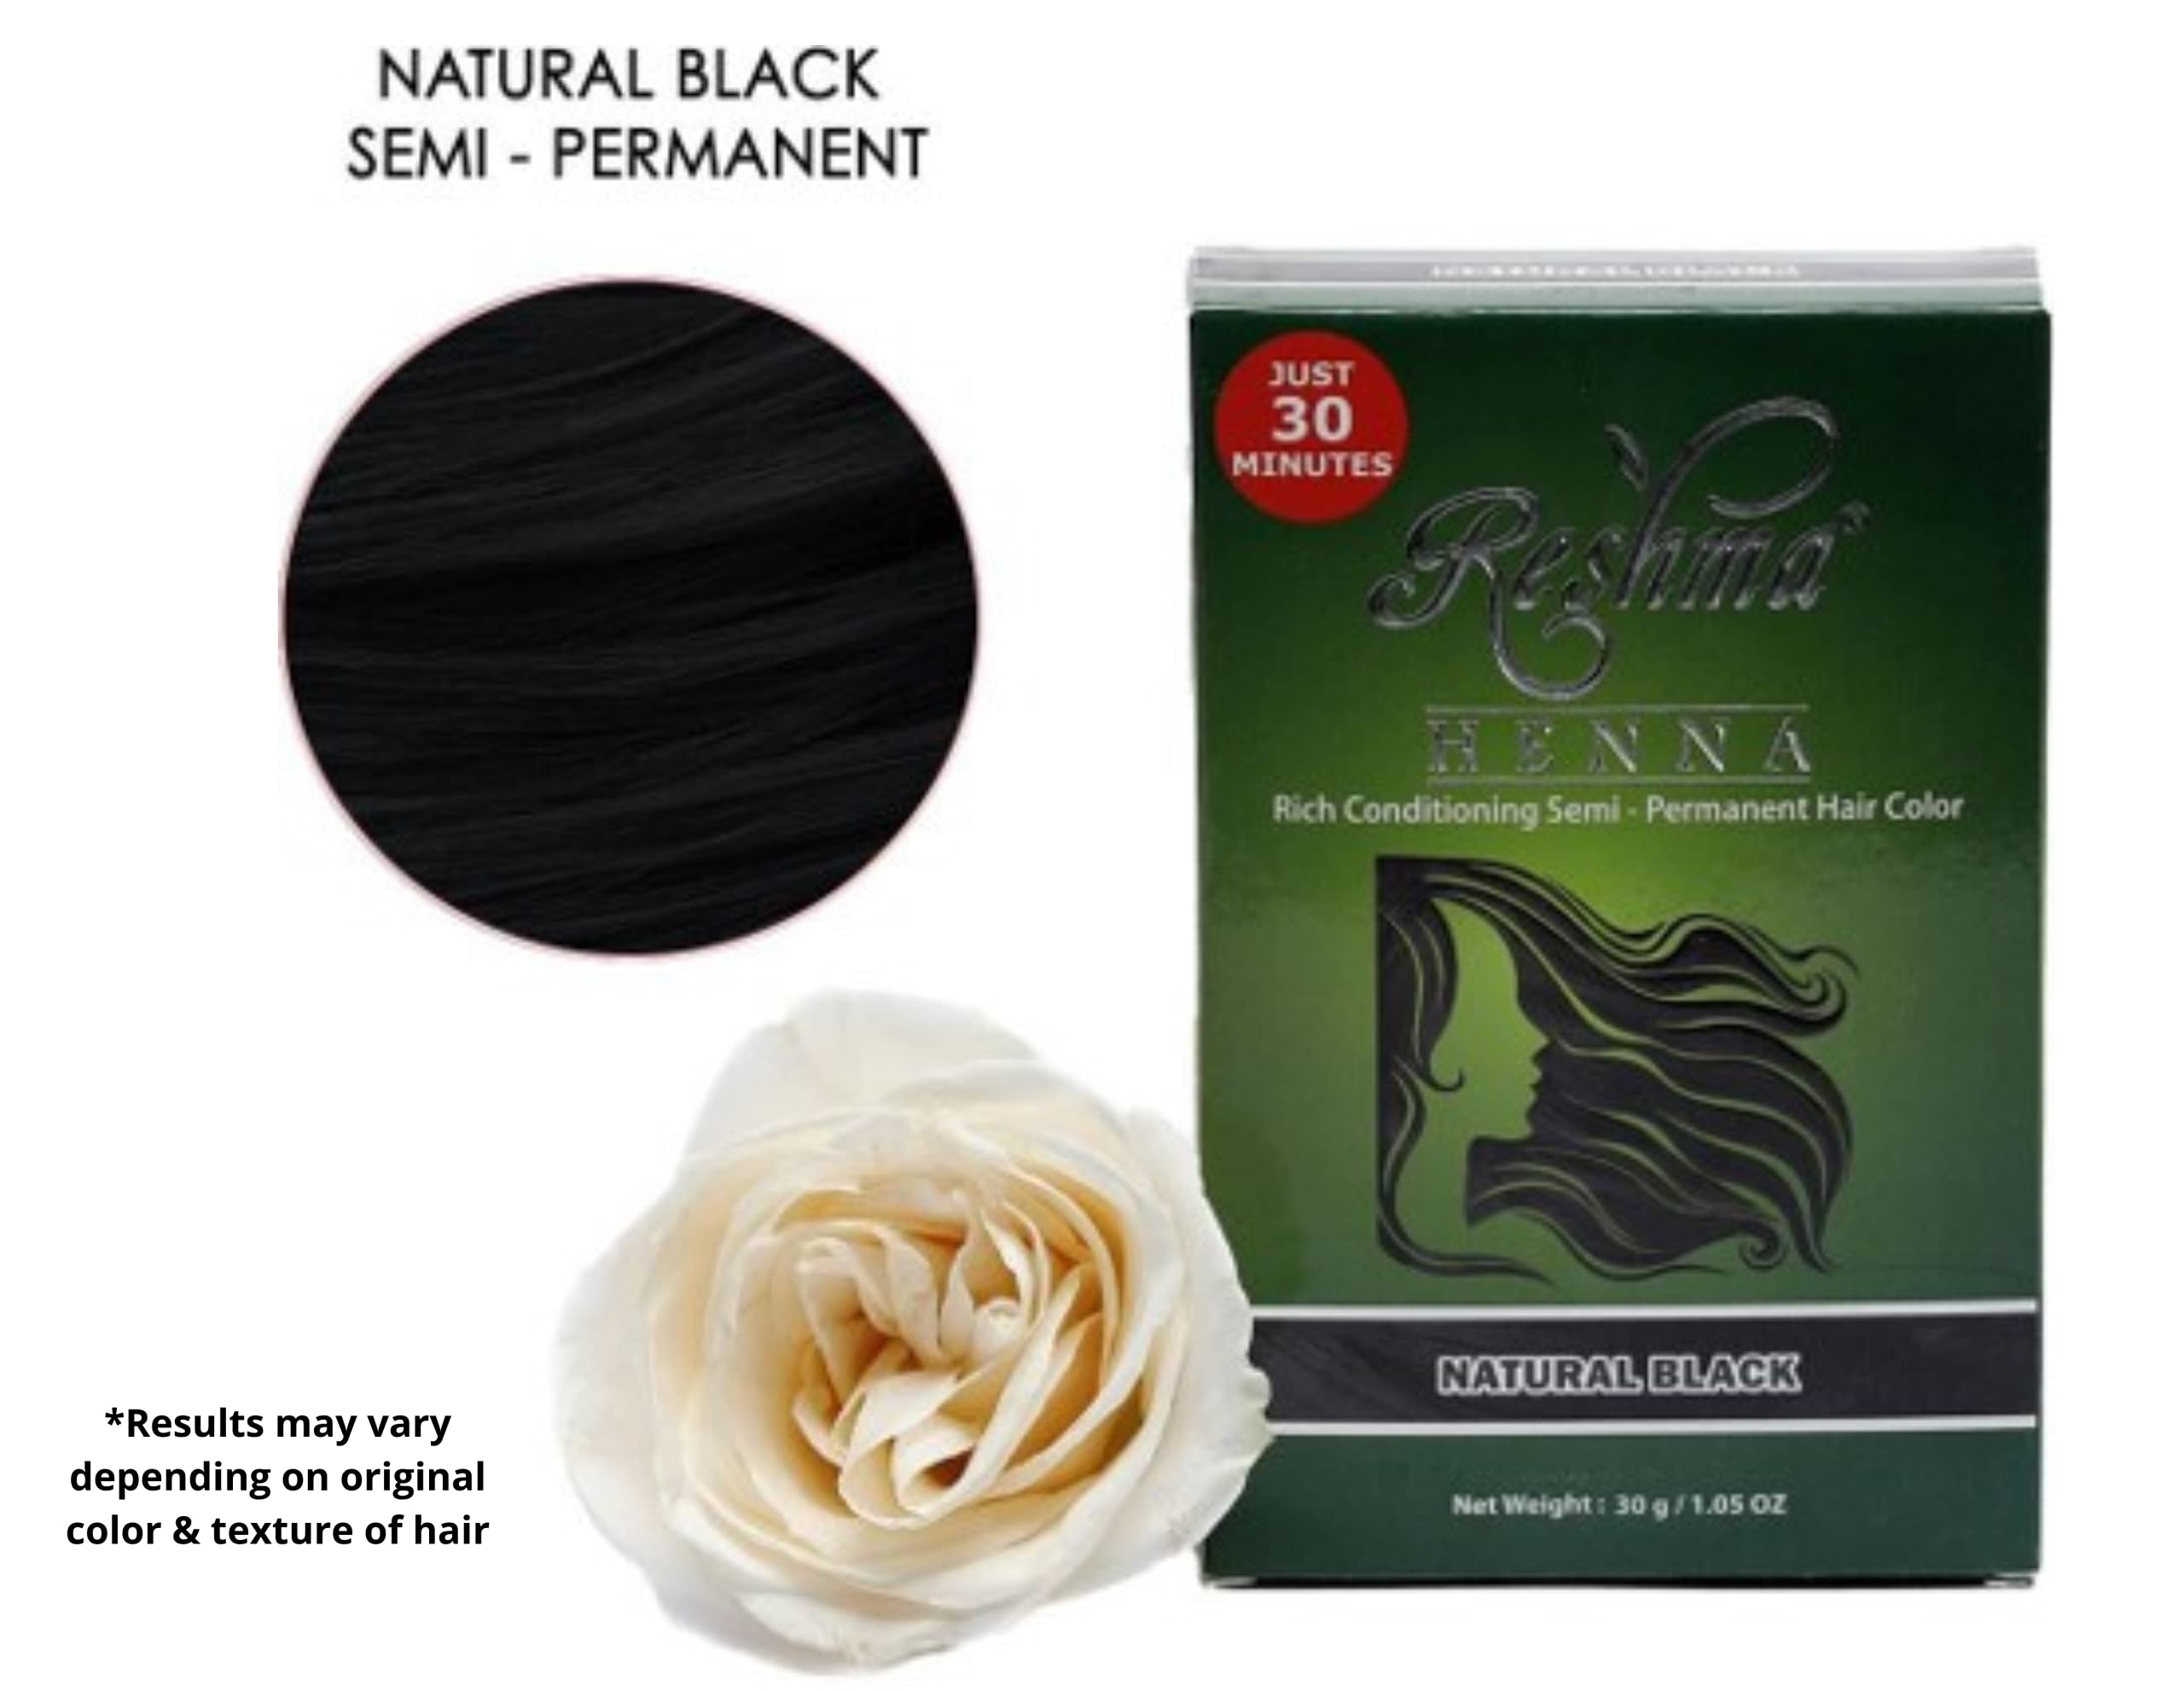 Reshma Beauty 30 Minute Henna Hair Color Infused with Goodness of Herbs (Natural Black, Pack Of 12)